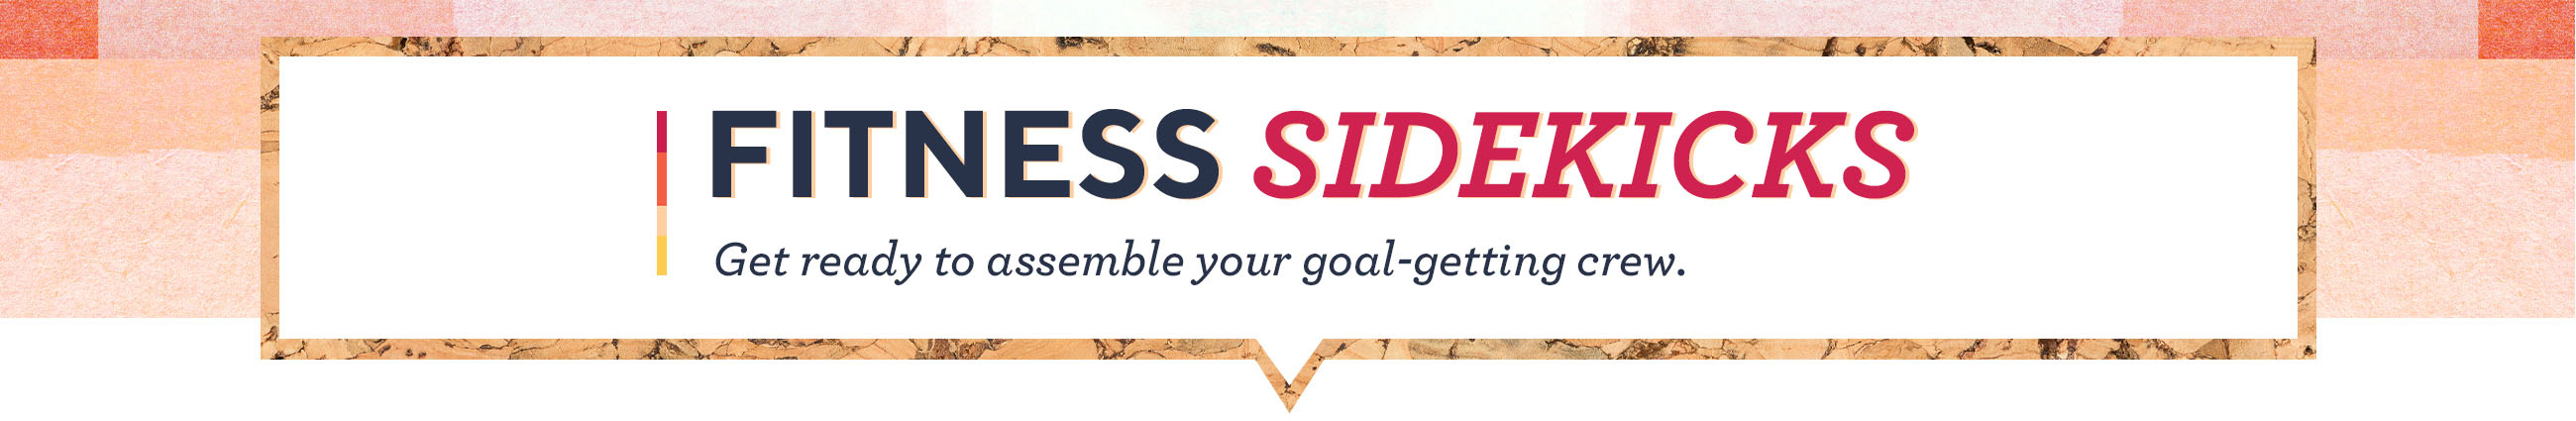 Fitness Sidekicks - Get ready to assemble your goal-getting crew.